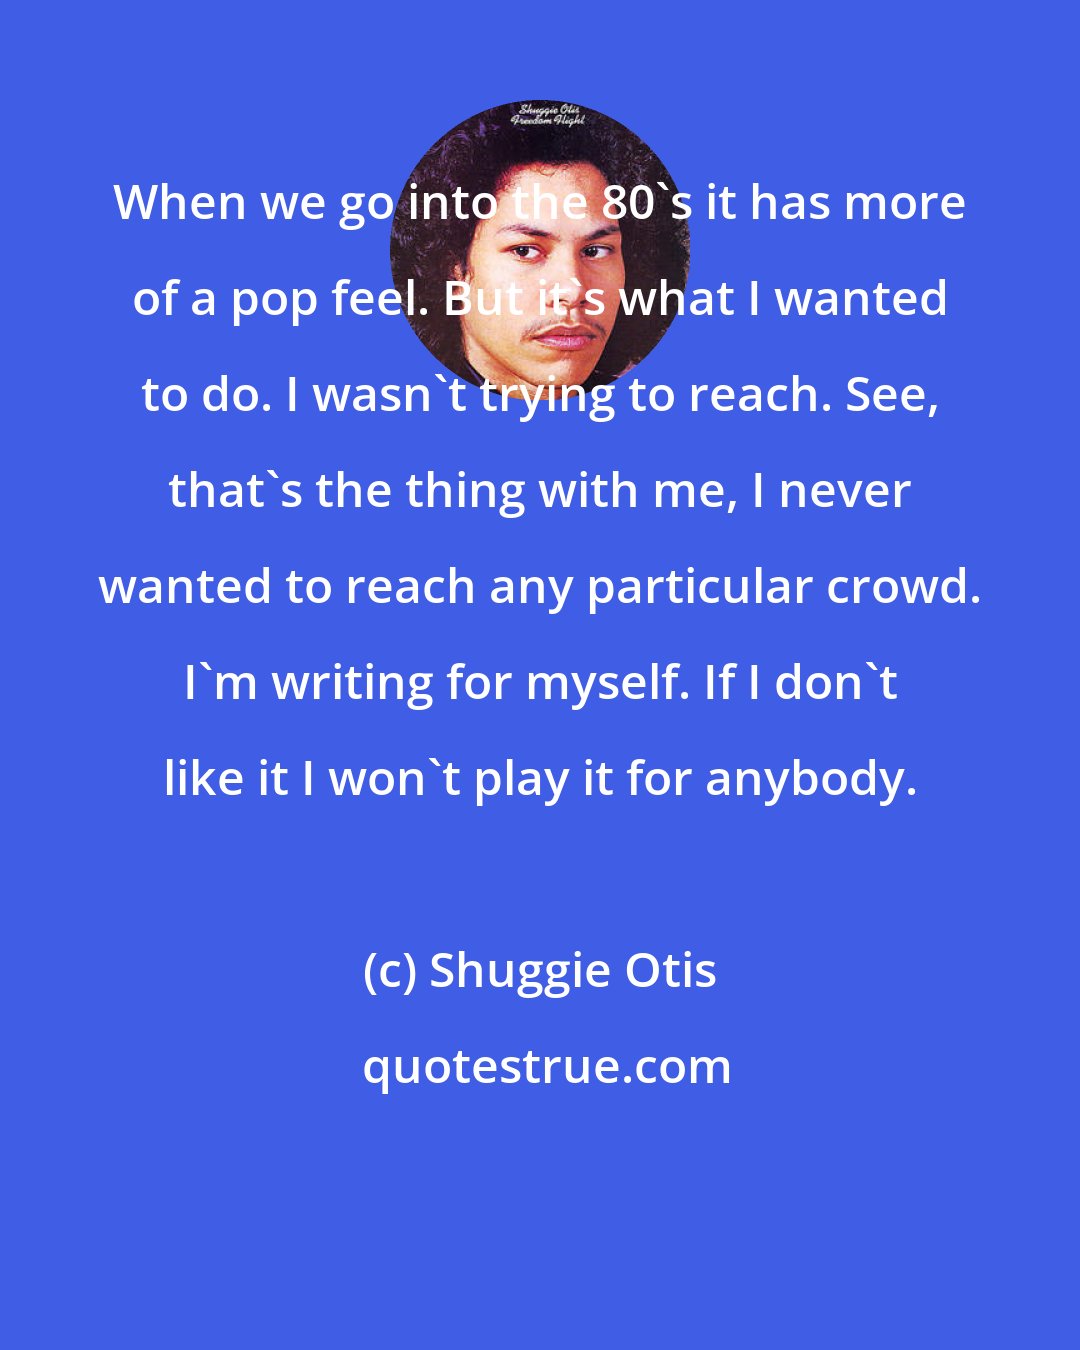 Shuggie Otis: When we go into the 80's it has more of a pop feel. But it's what I wanted to do. I wasn't trying to reach. See, that's the thing with me, I never wanted to reach any particular crowd. I'm writing for myself. If I don't like it I won't play it for anybody.